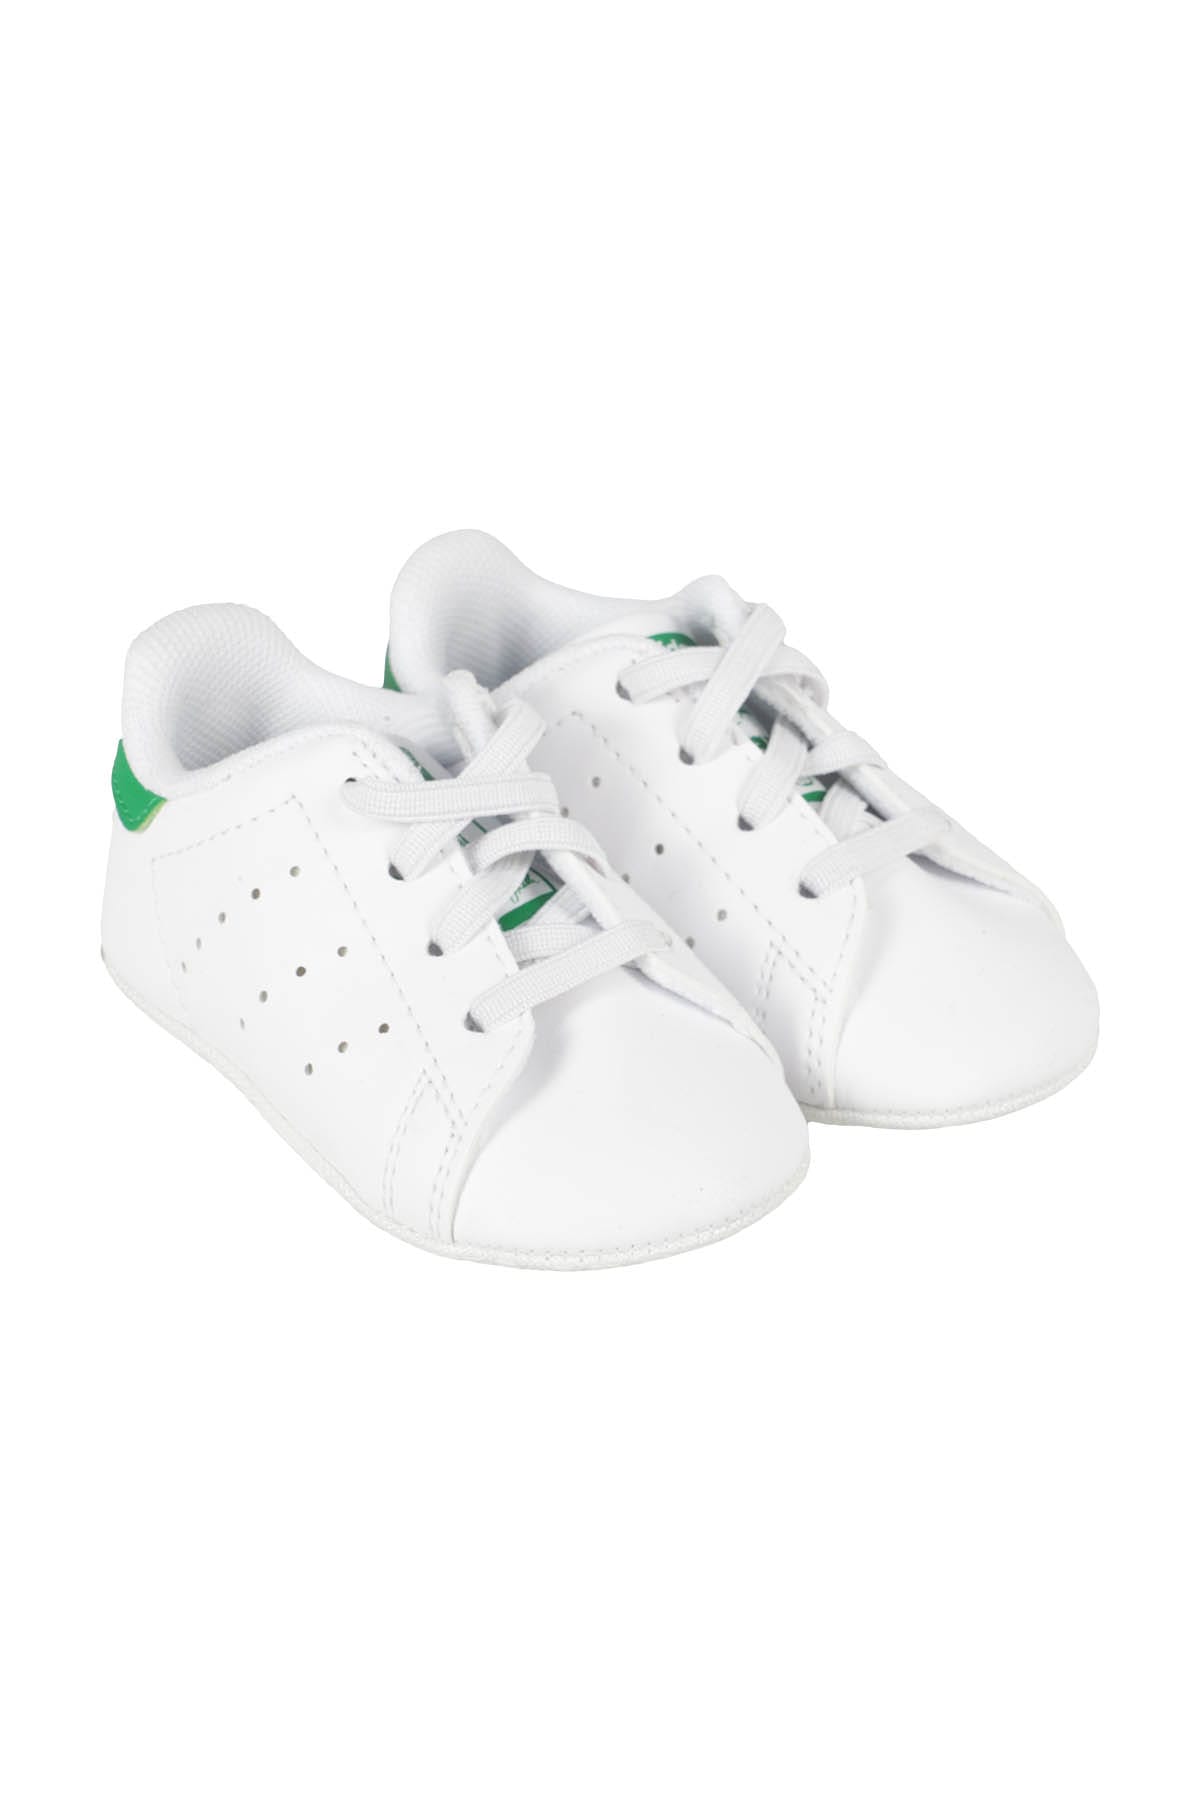 Adidas Originals Kids' Stan Smith Crib Faux Leather Trainers In White